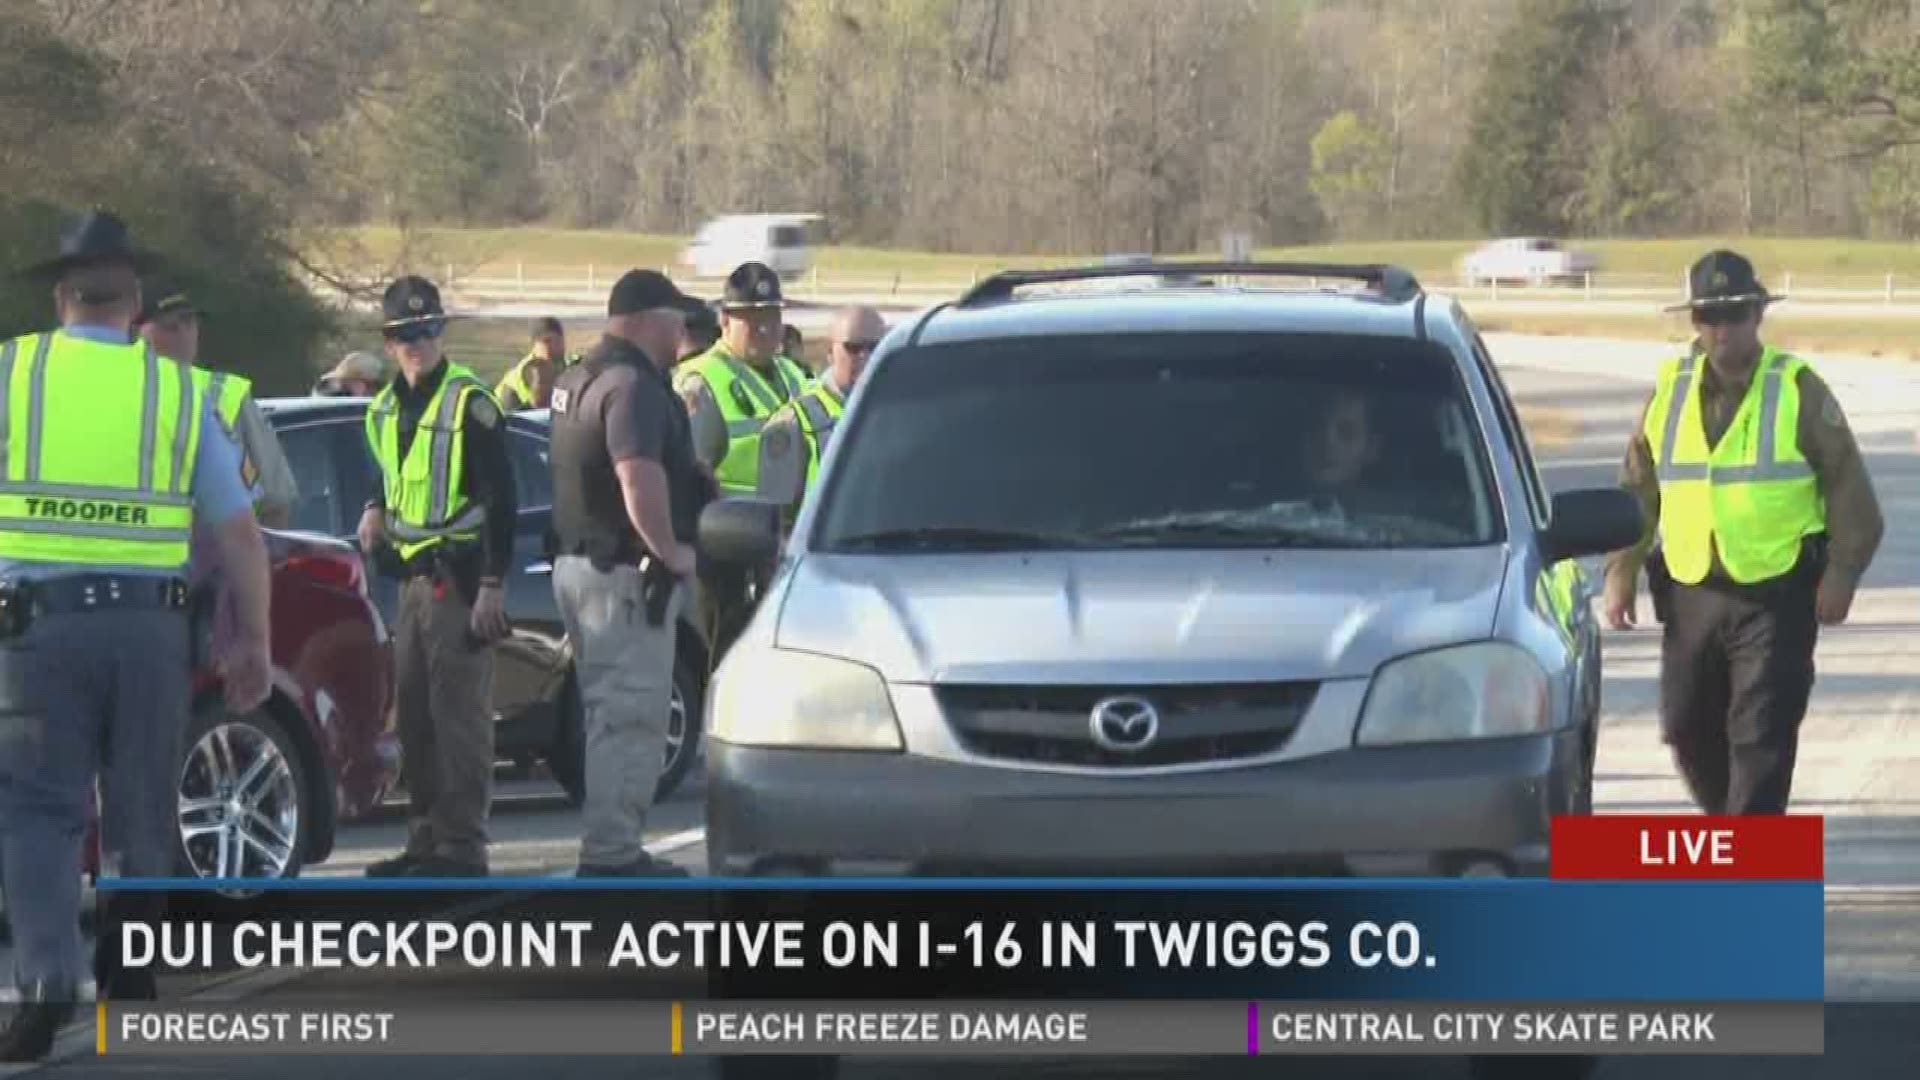 DUI checkpoint active on I-16 in Twiggs